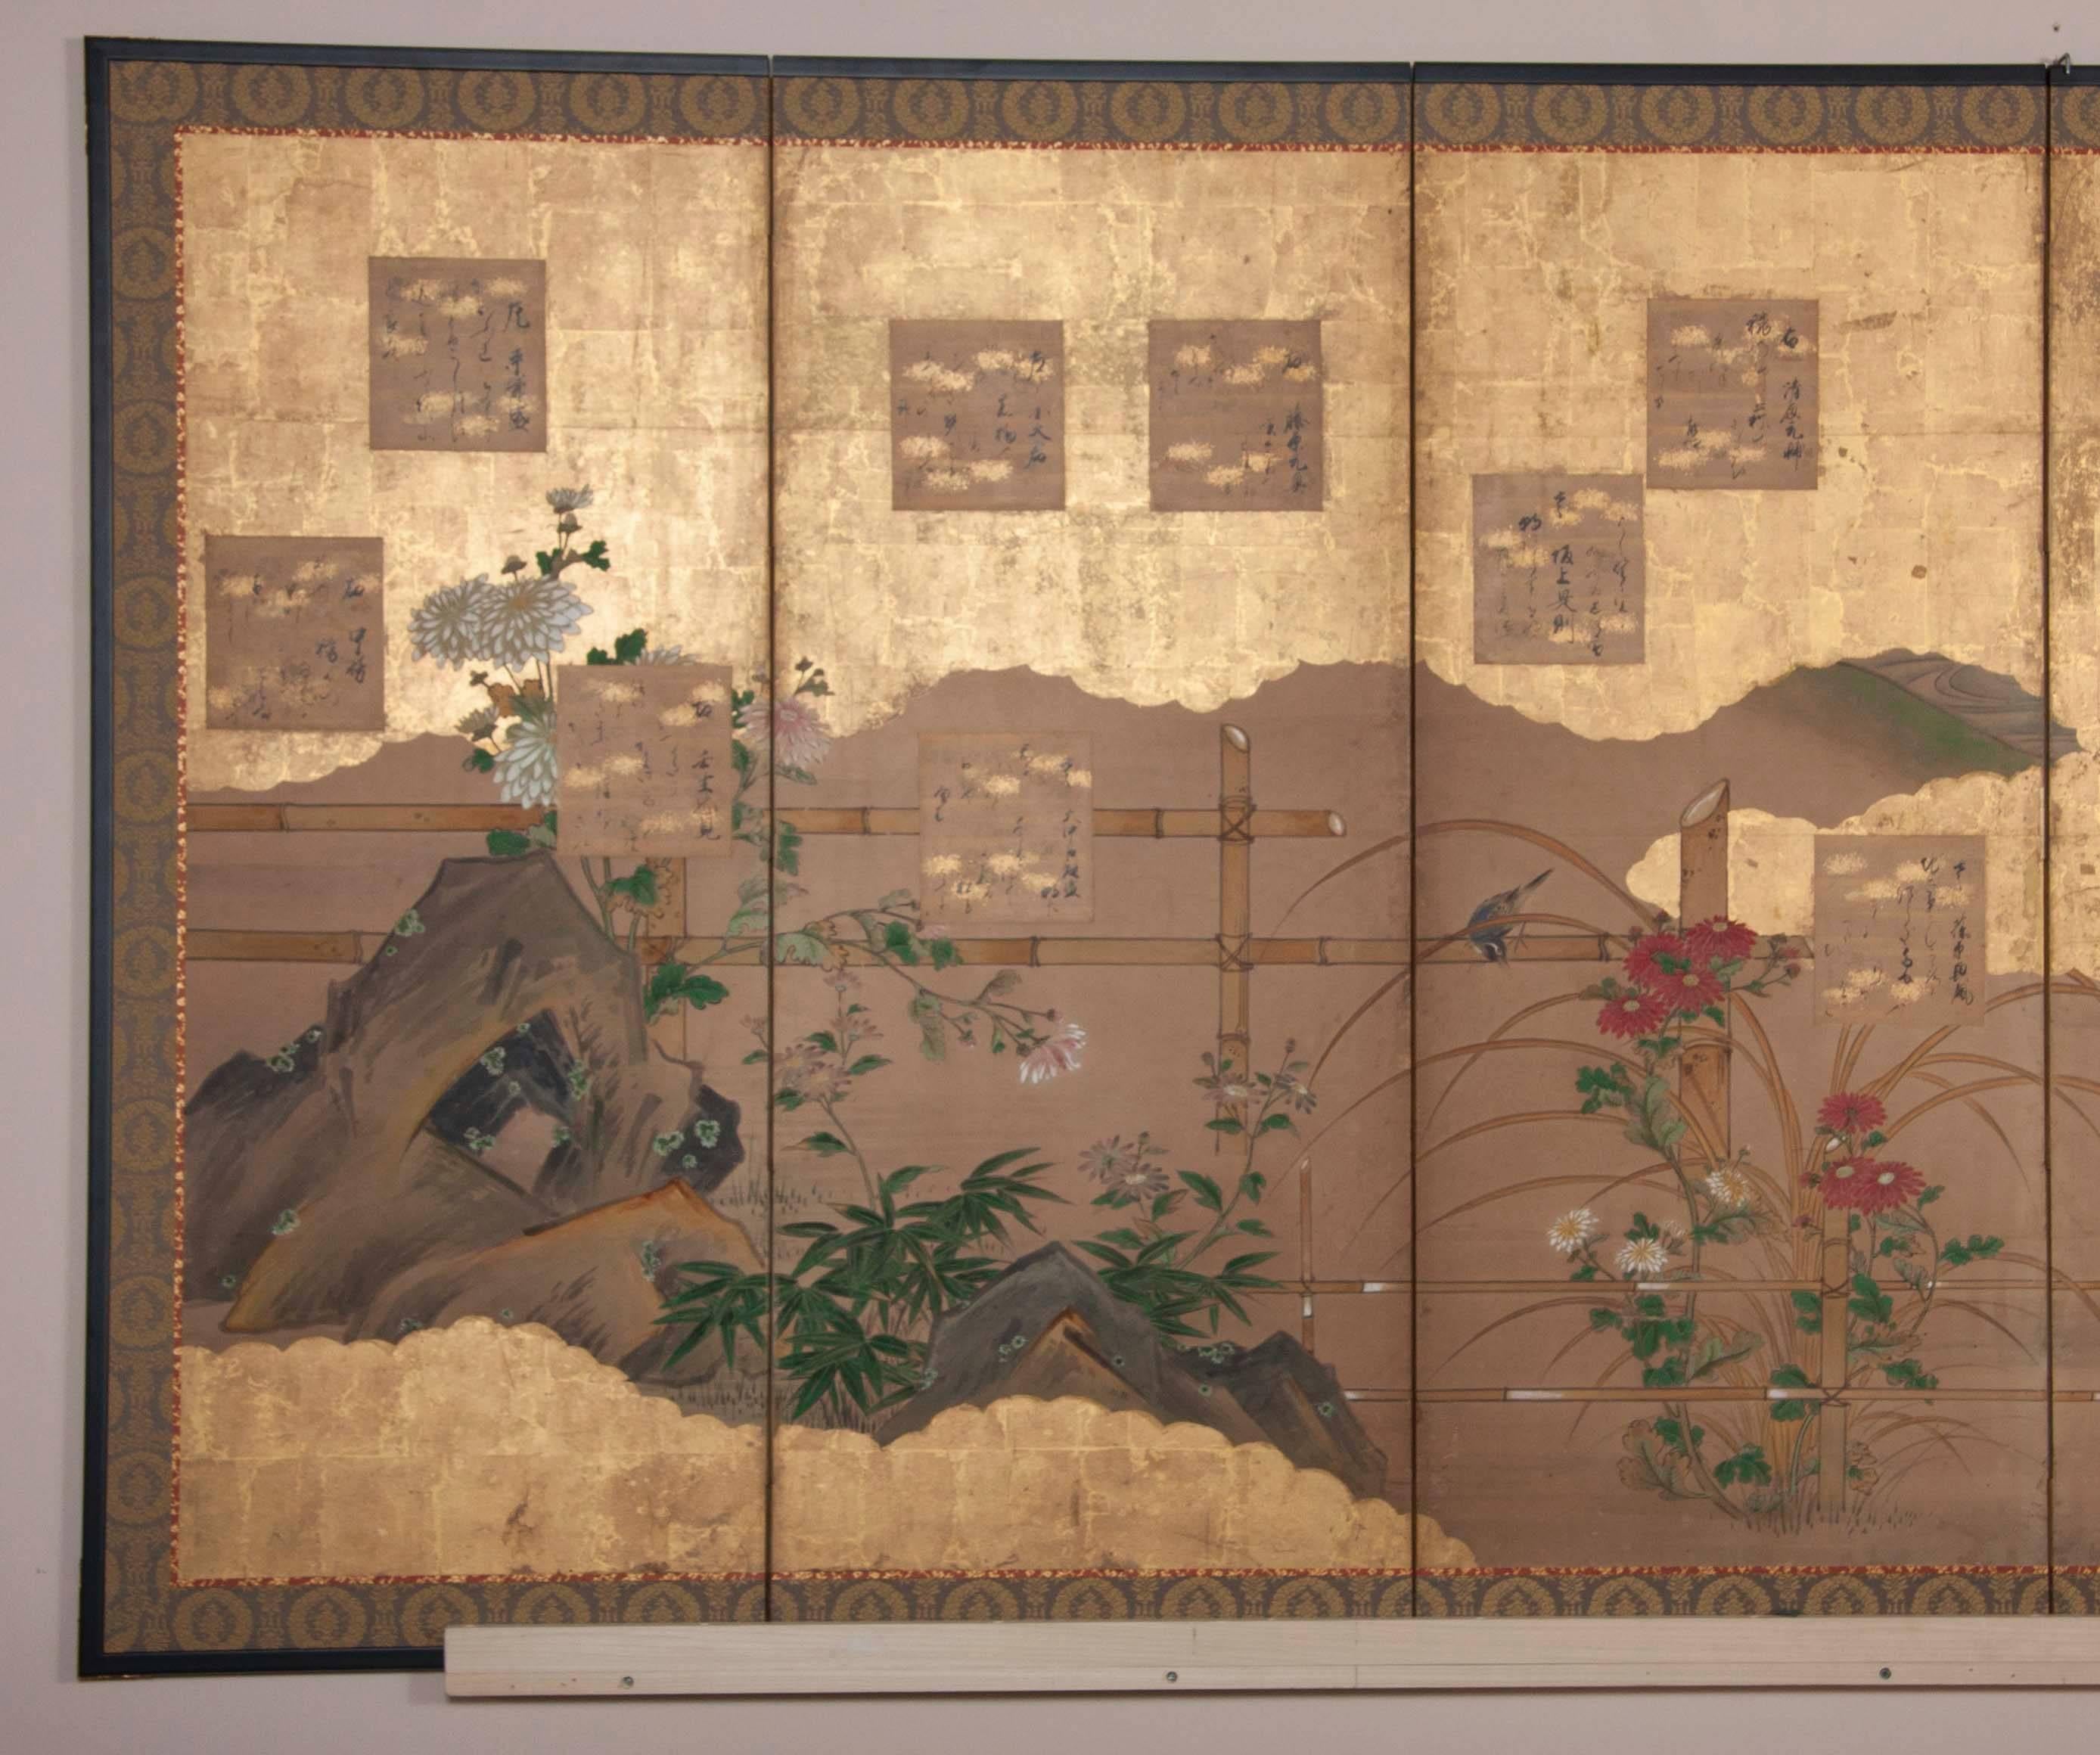 A six-panel Japanese paper screen with poems, autumn flowers, bamboo fence and Mandarin ducks. Poems are believed to be earlier but were probably added.